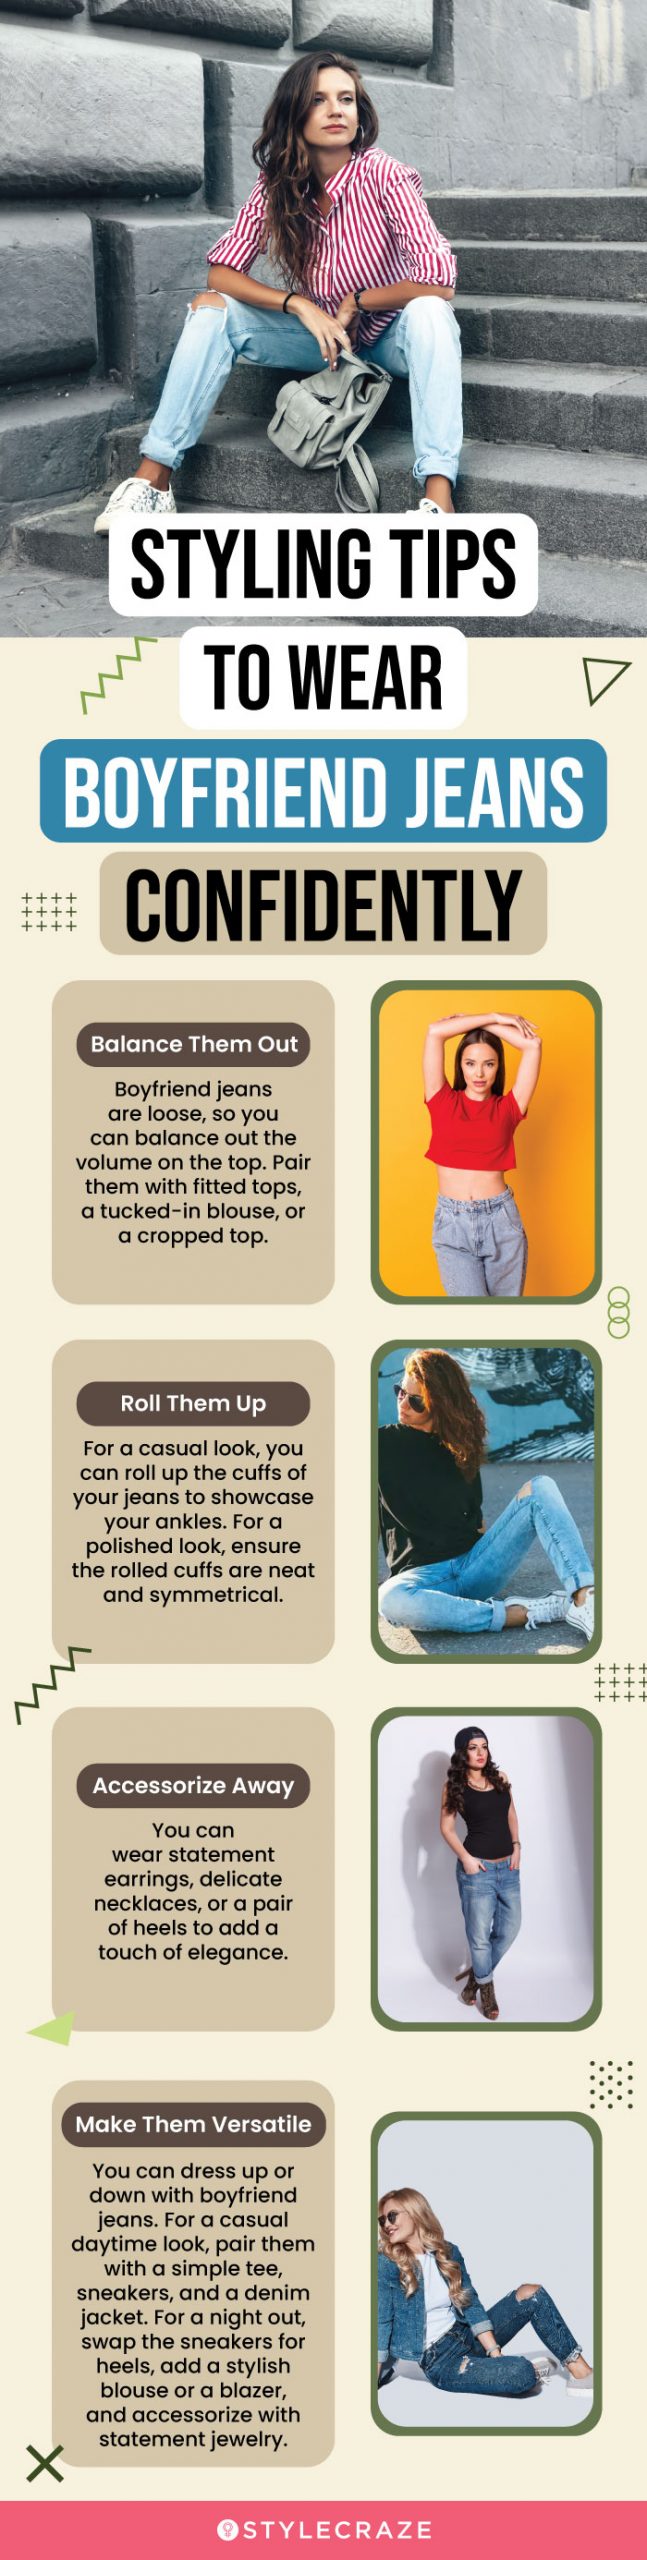 styling tips to wear boyfriend jeans confidently (infographic)